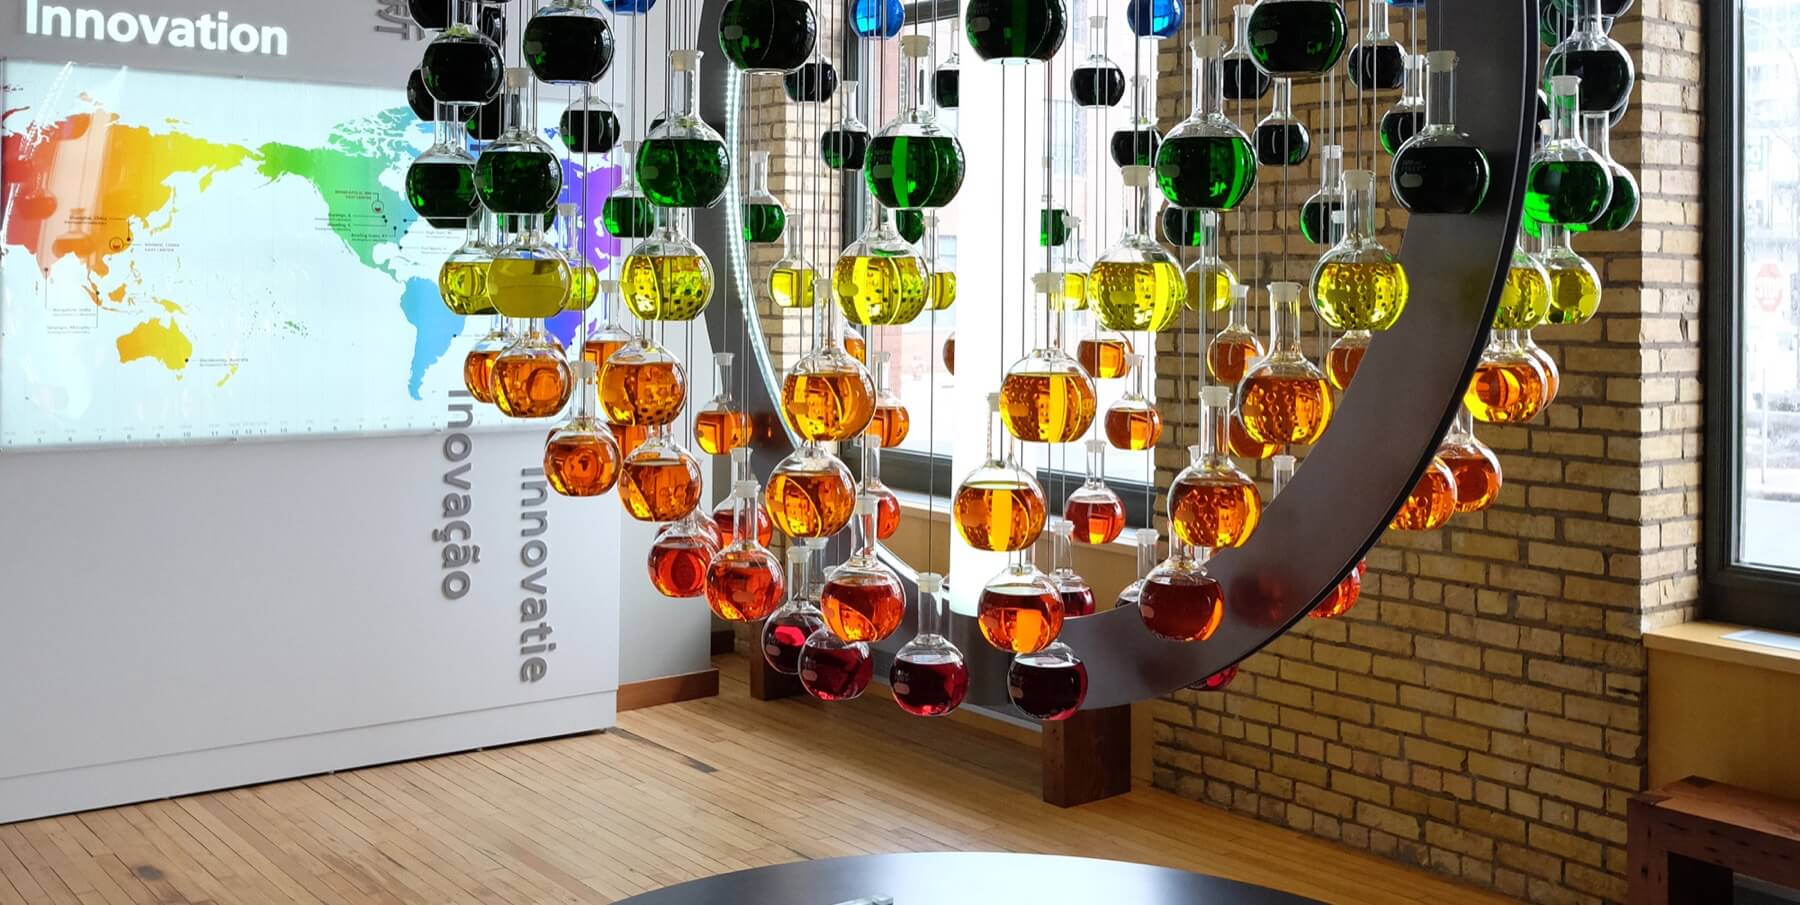 Science themed marketing display that uses flasks filled with colorful liquid